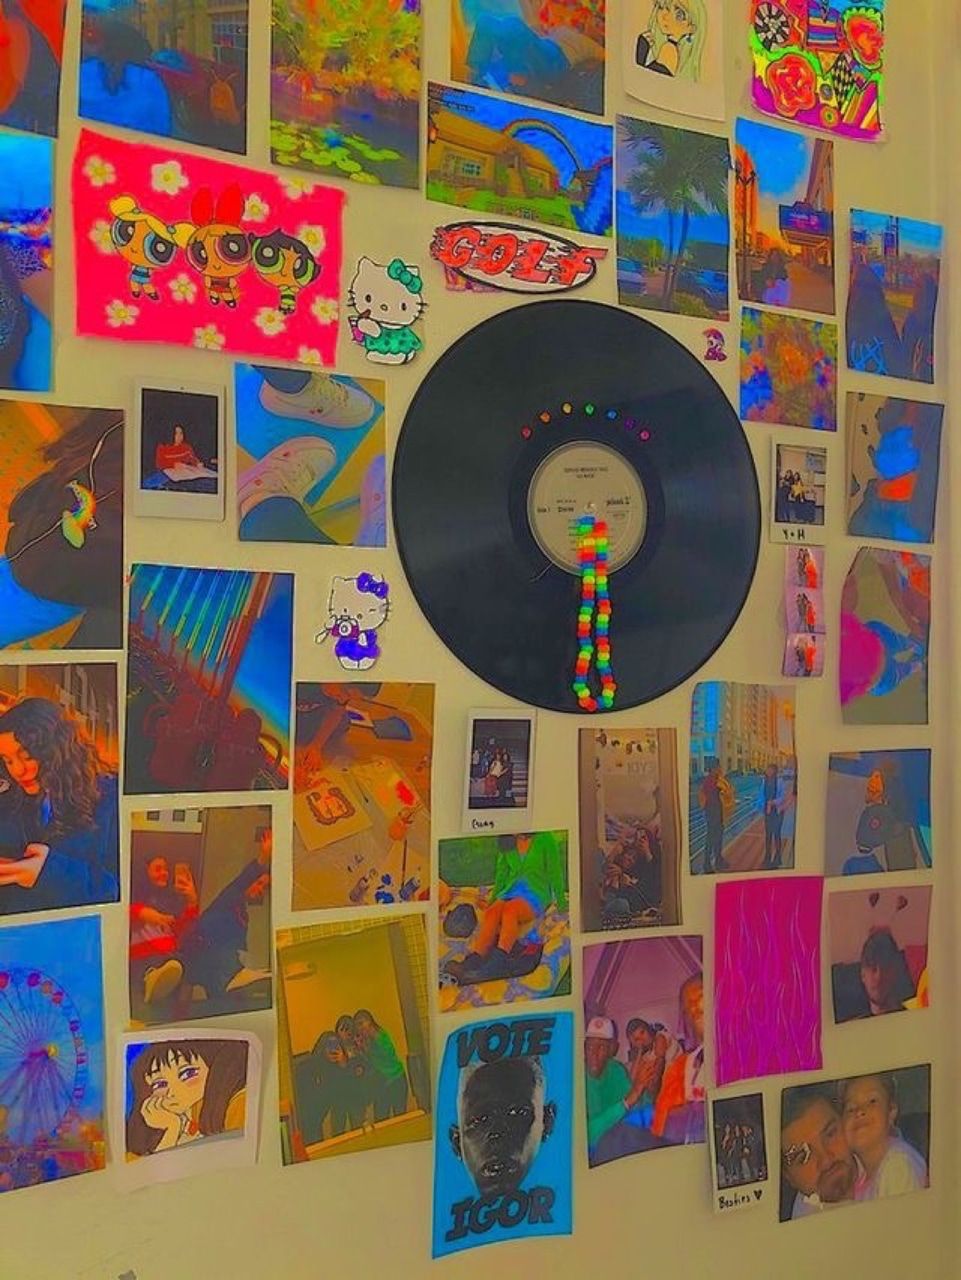 A wall covered in photos and a vinyl record. - Indie